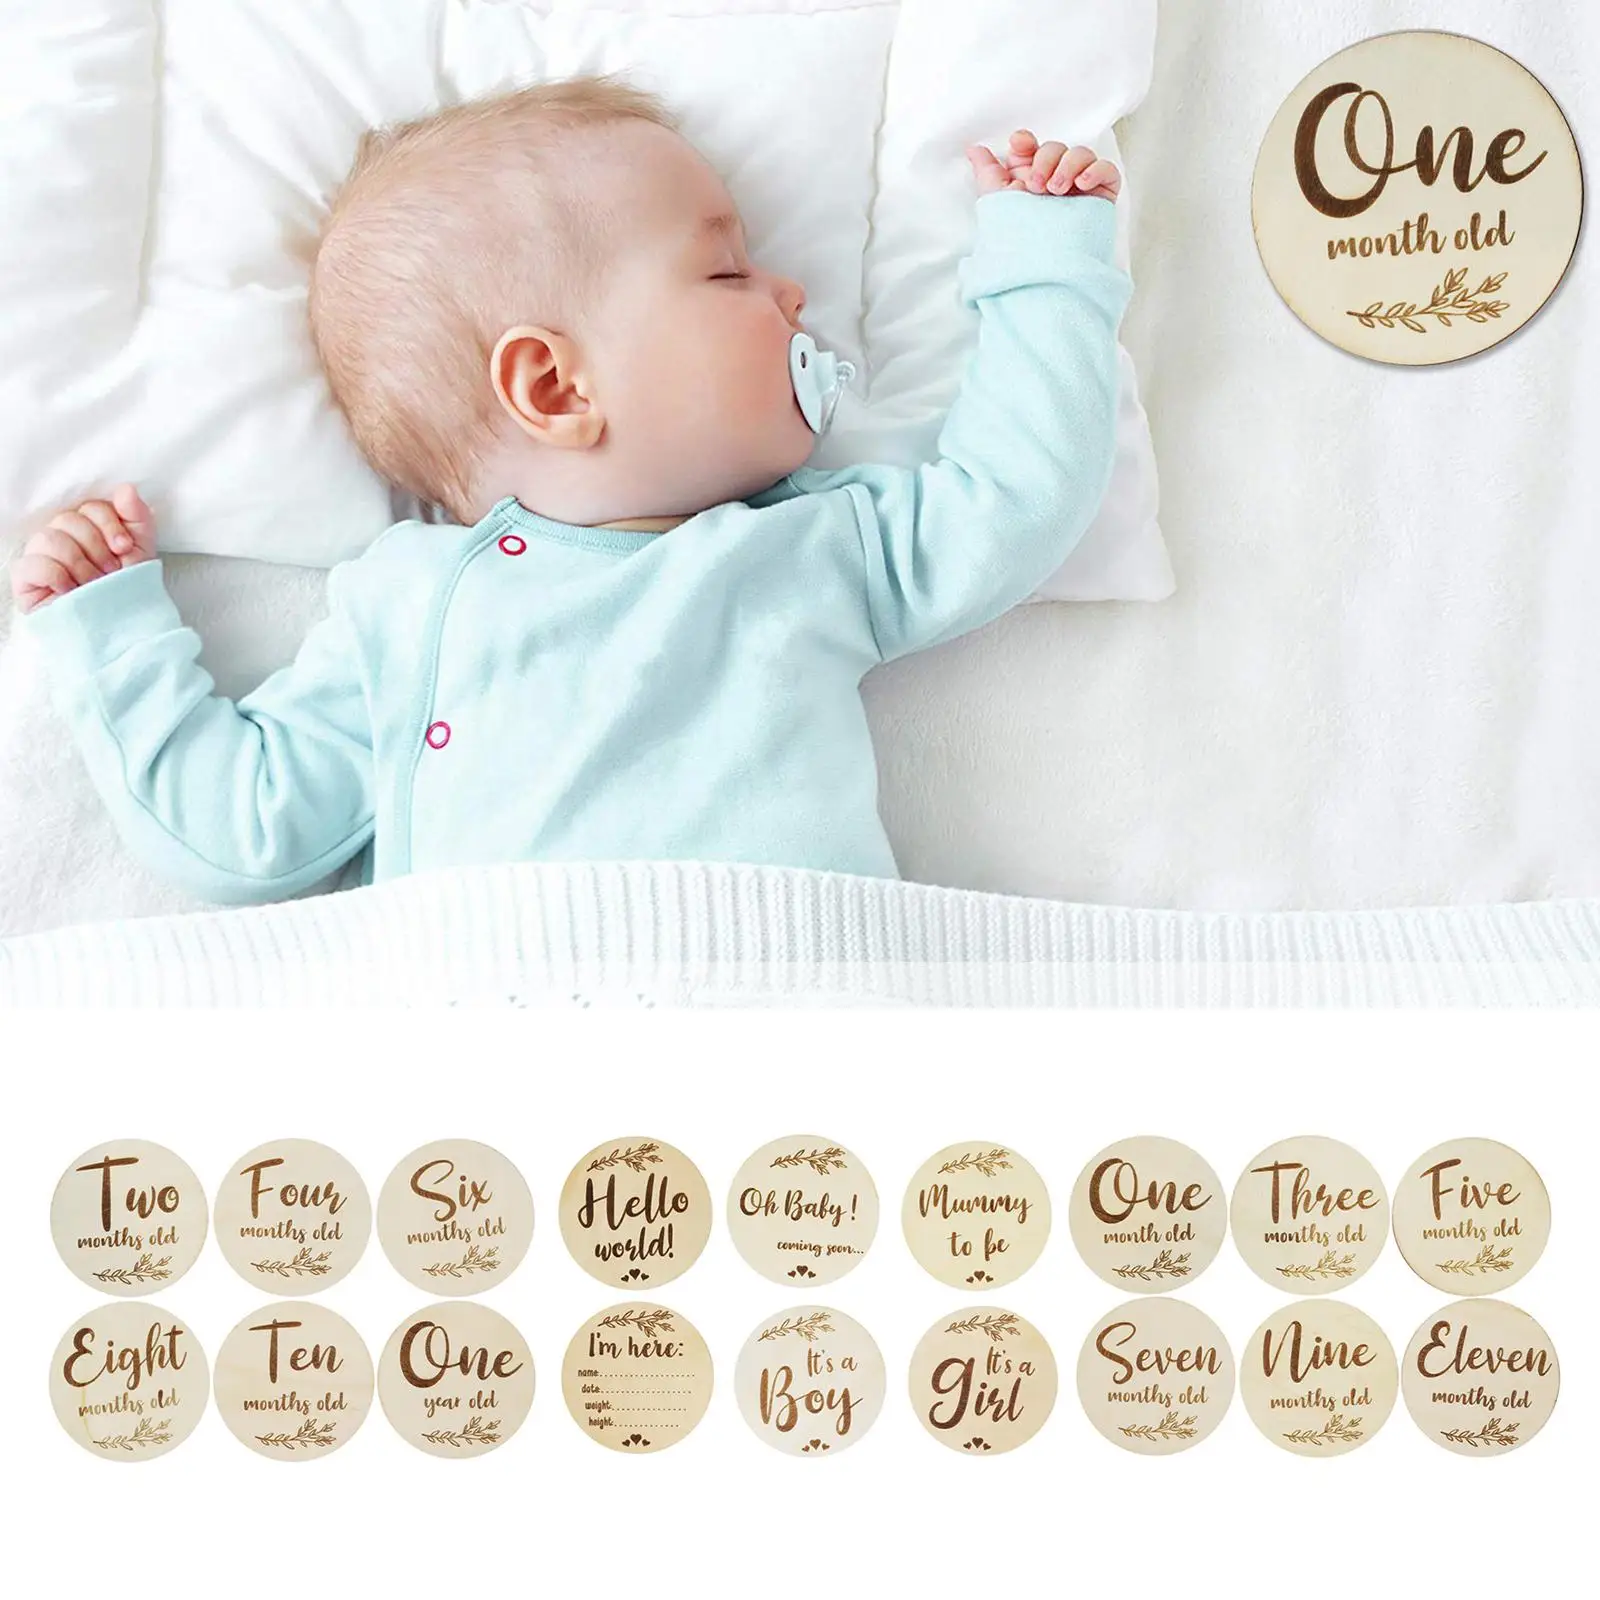  6Pcs   Baby   Birth   Milestone   Wooden   Card   Month   Record   Date   for   Baby   Shower 